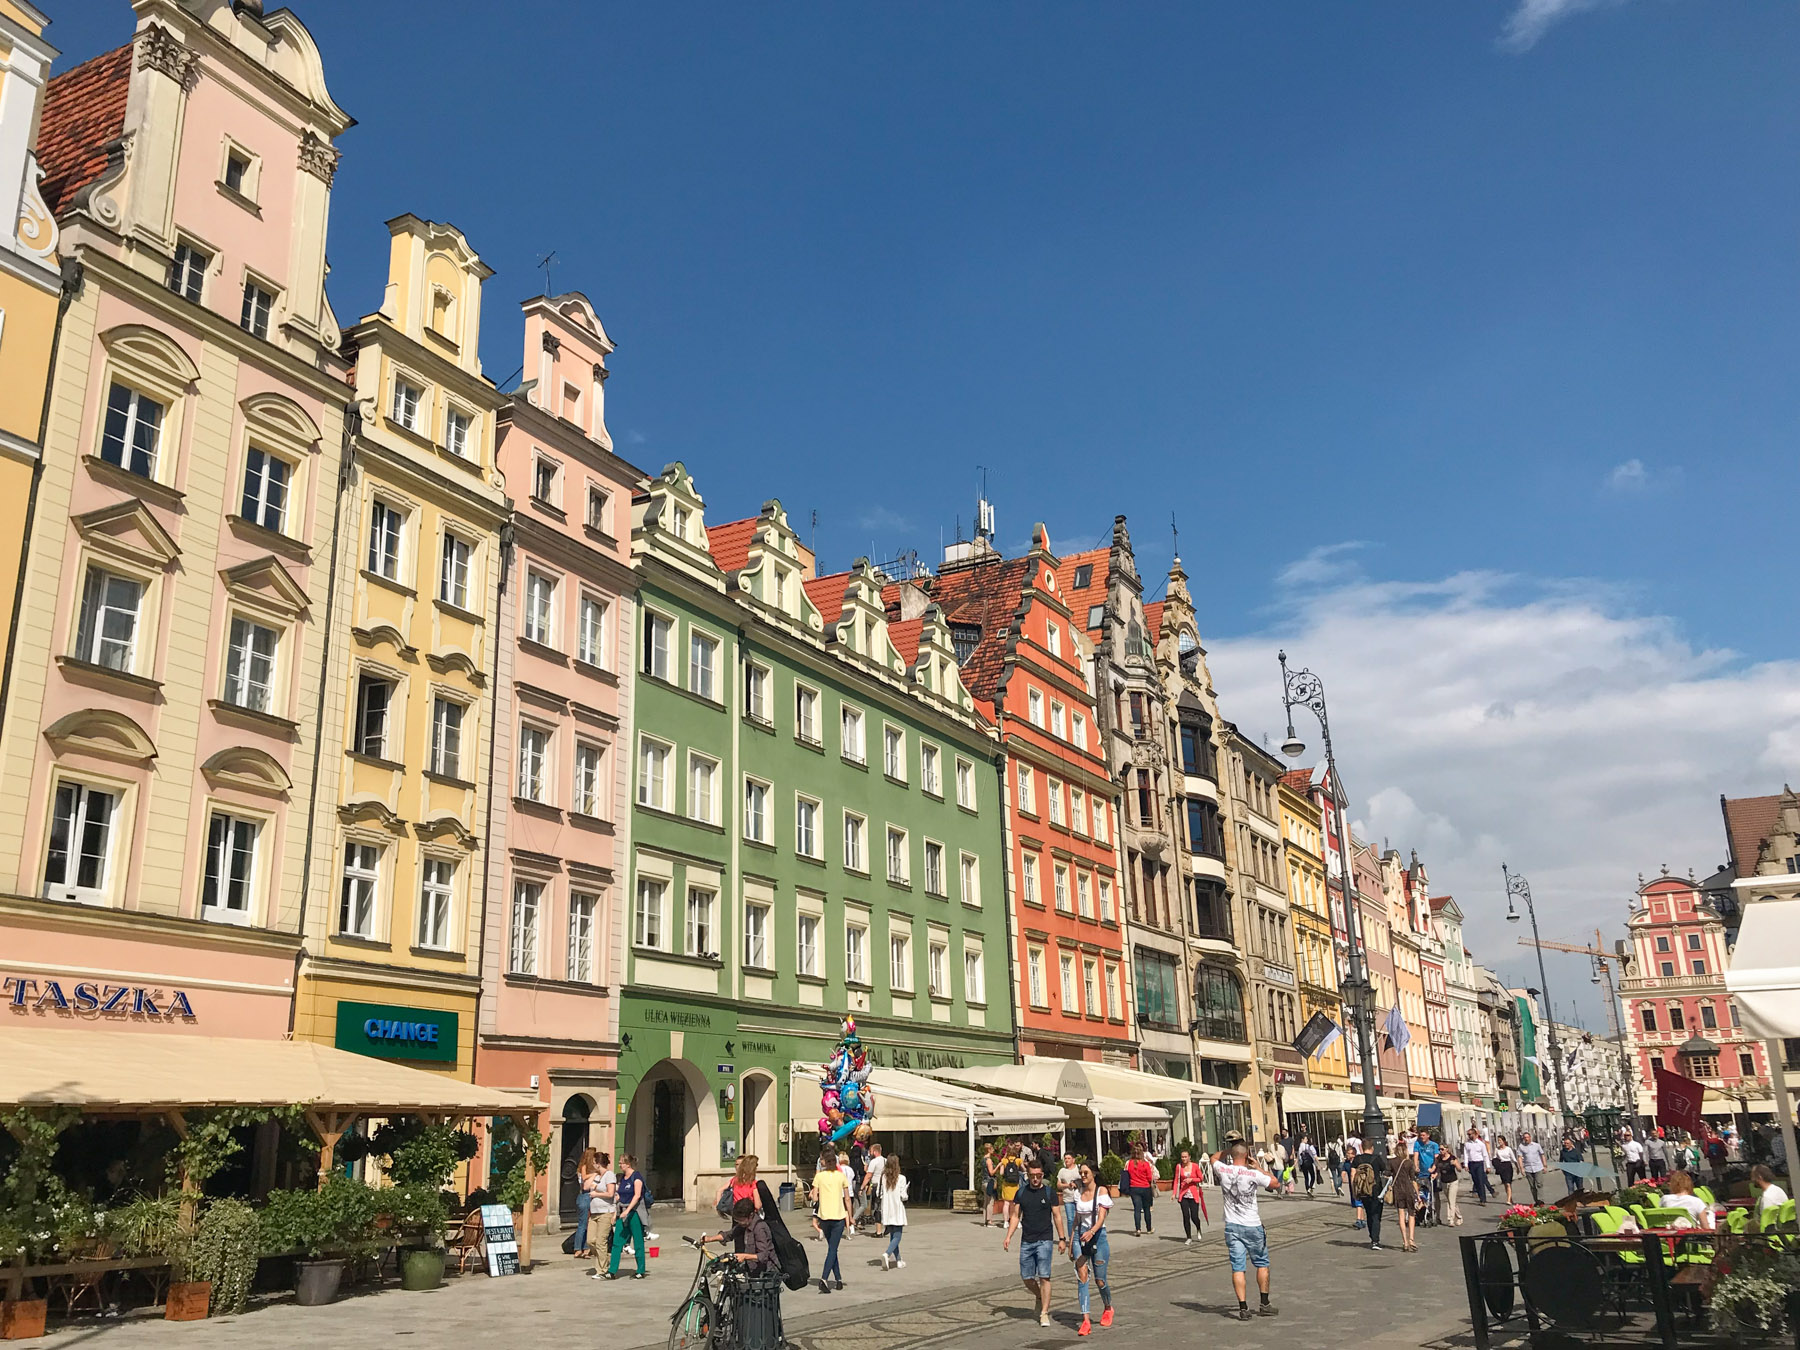 Colourful Wroclaw in Poland